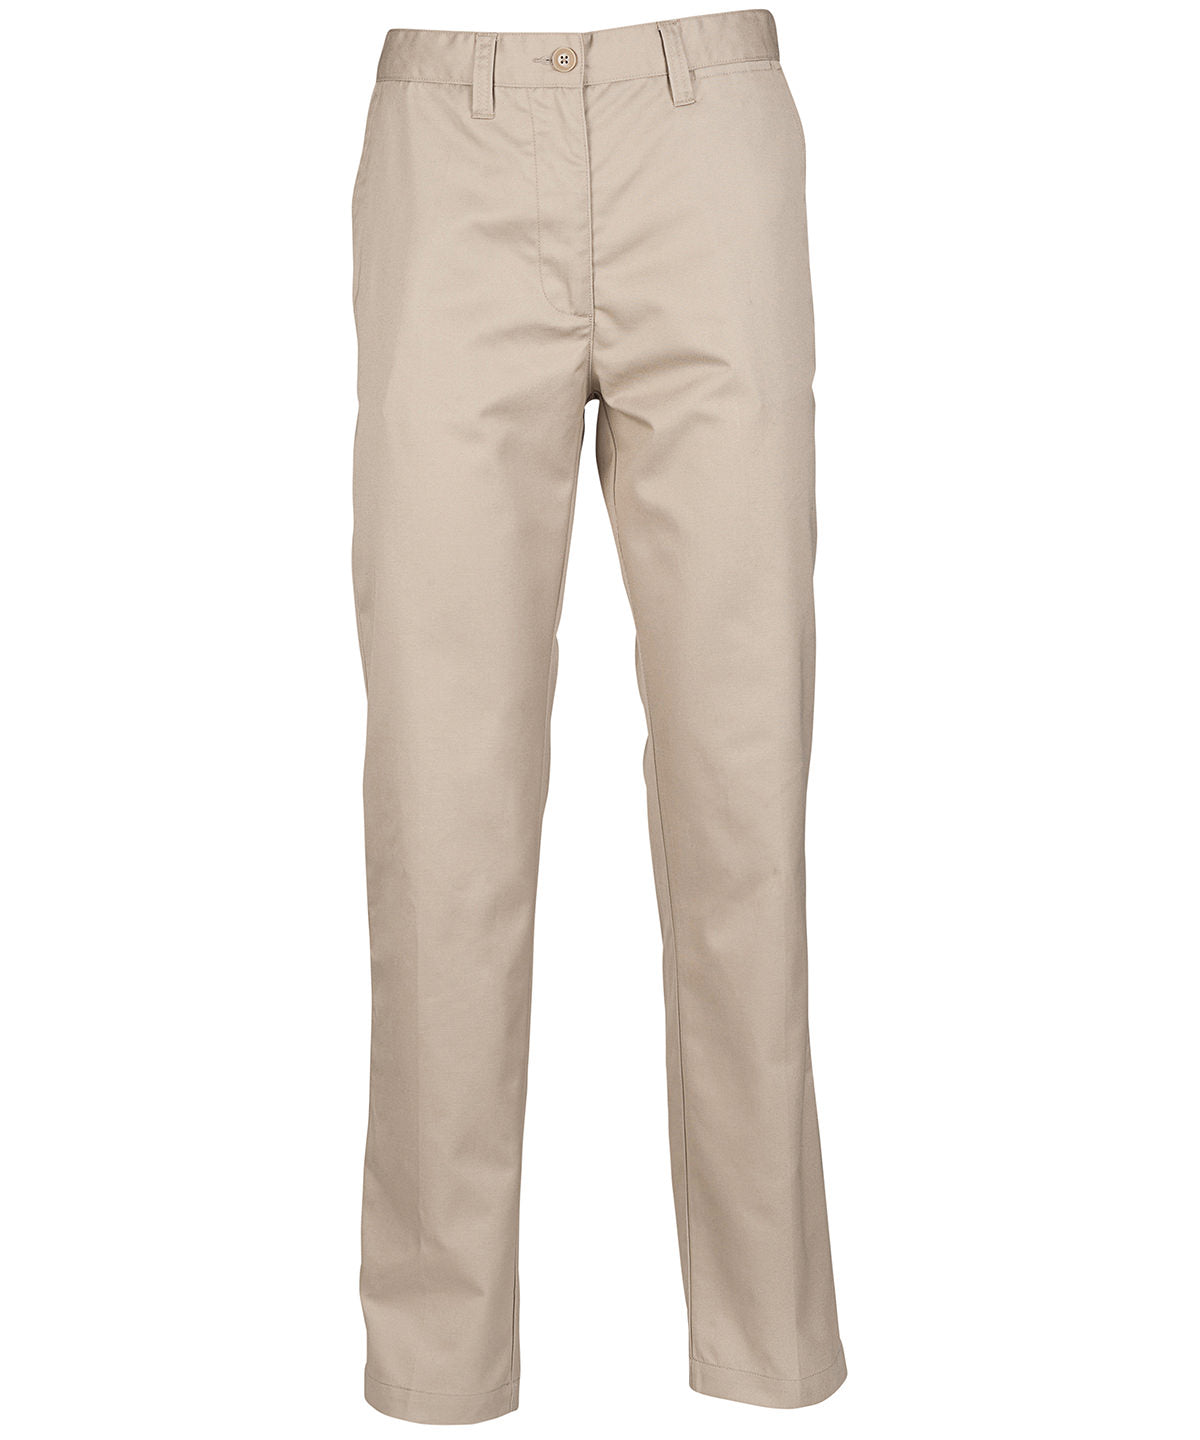 Buxur - Women's 65/35 Flat Fronted Chino Trousers